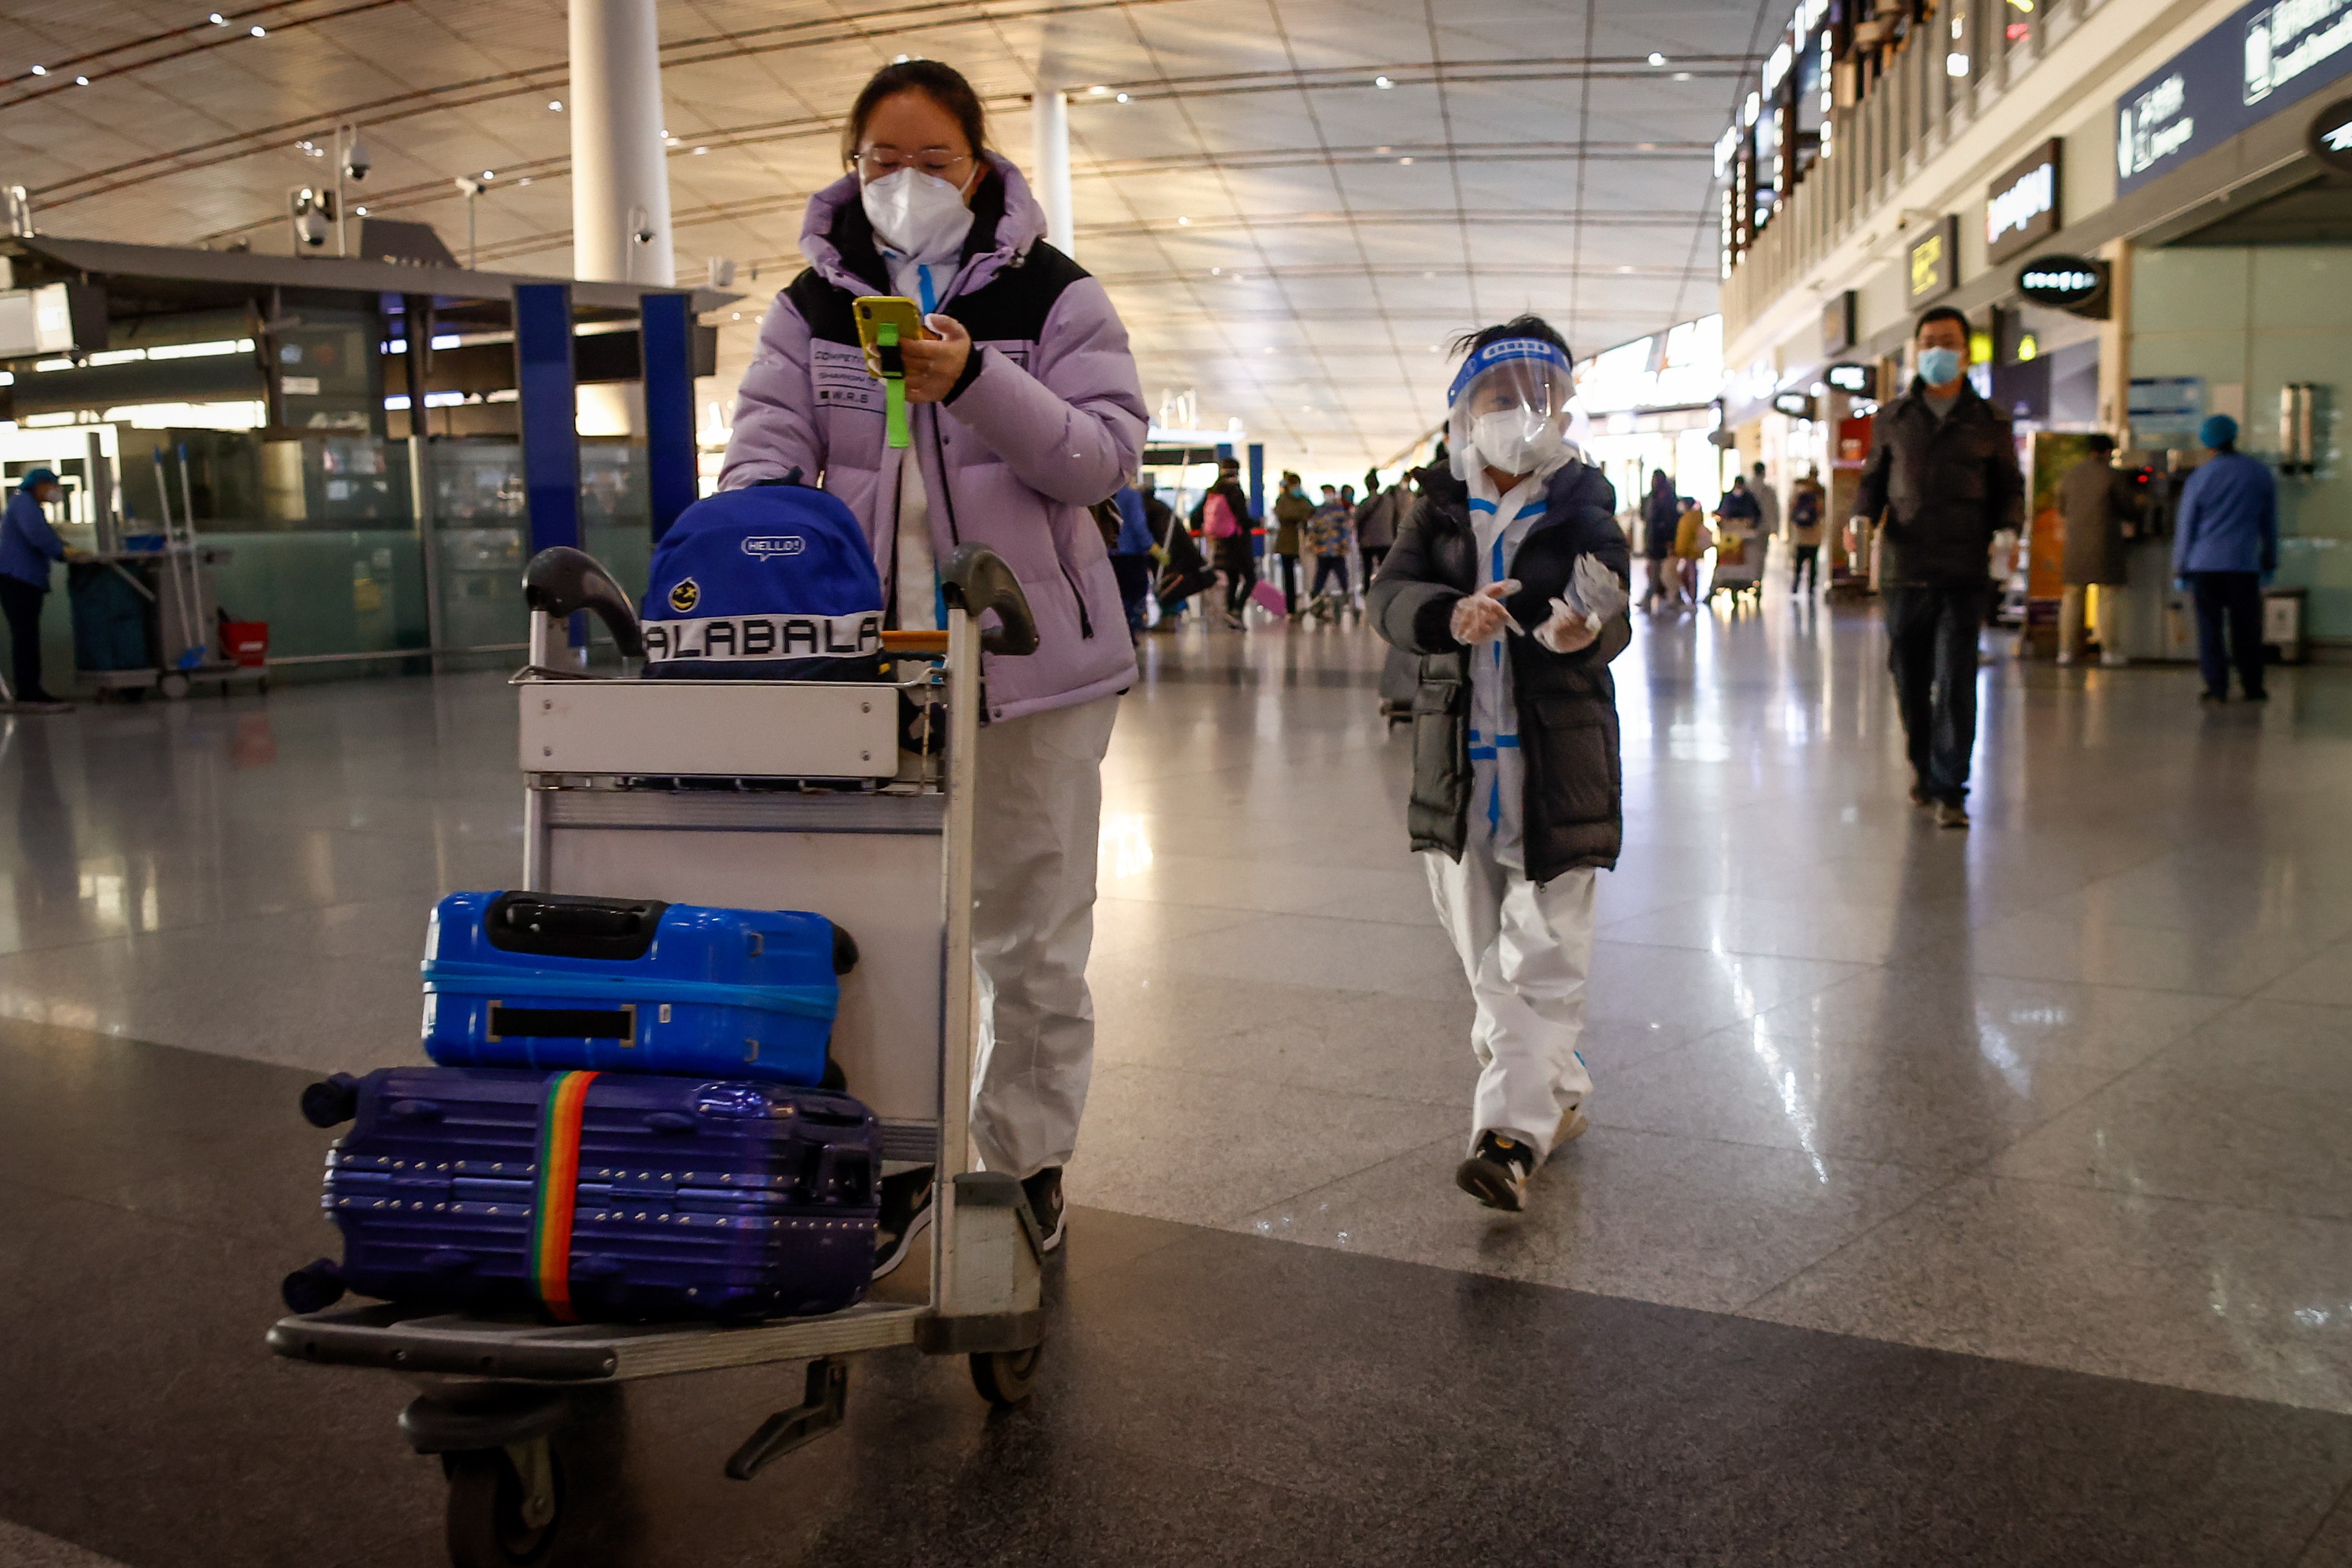 The new restrictions on travellers from China include mandatory Covid-19 tests, in-flight masking and even blanket bans on arrivals. Photo: EPA-EFE